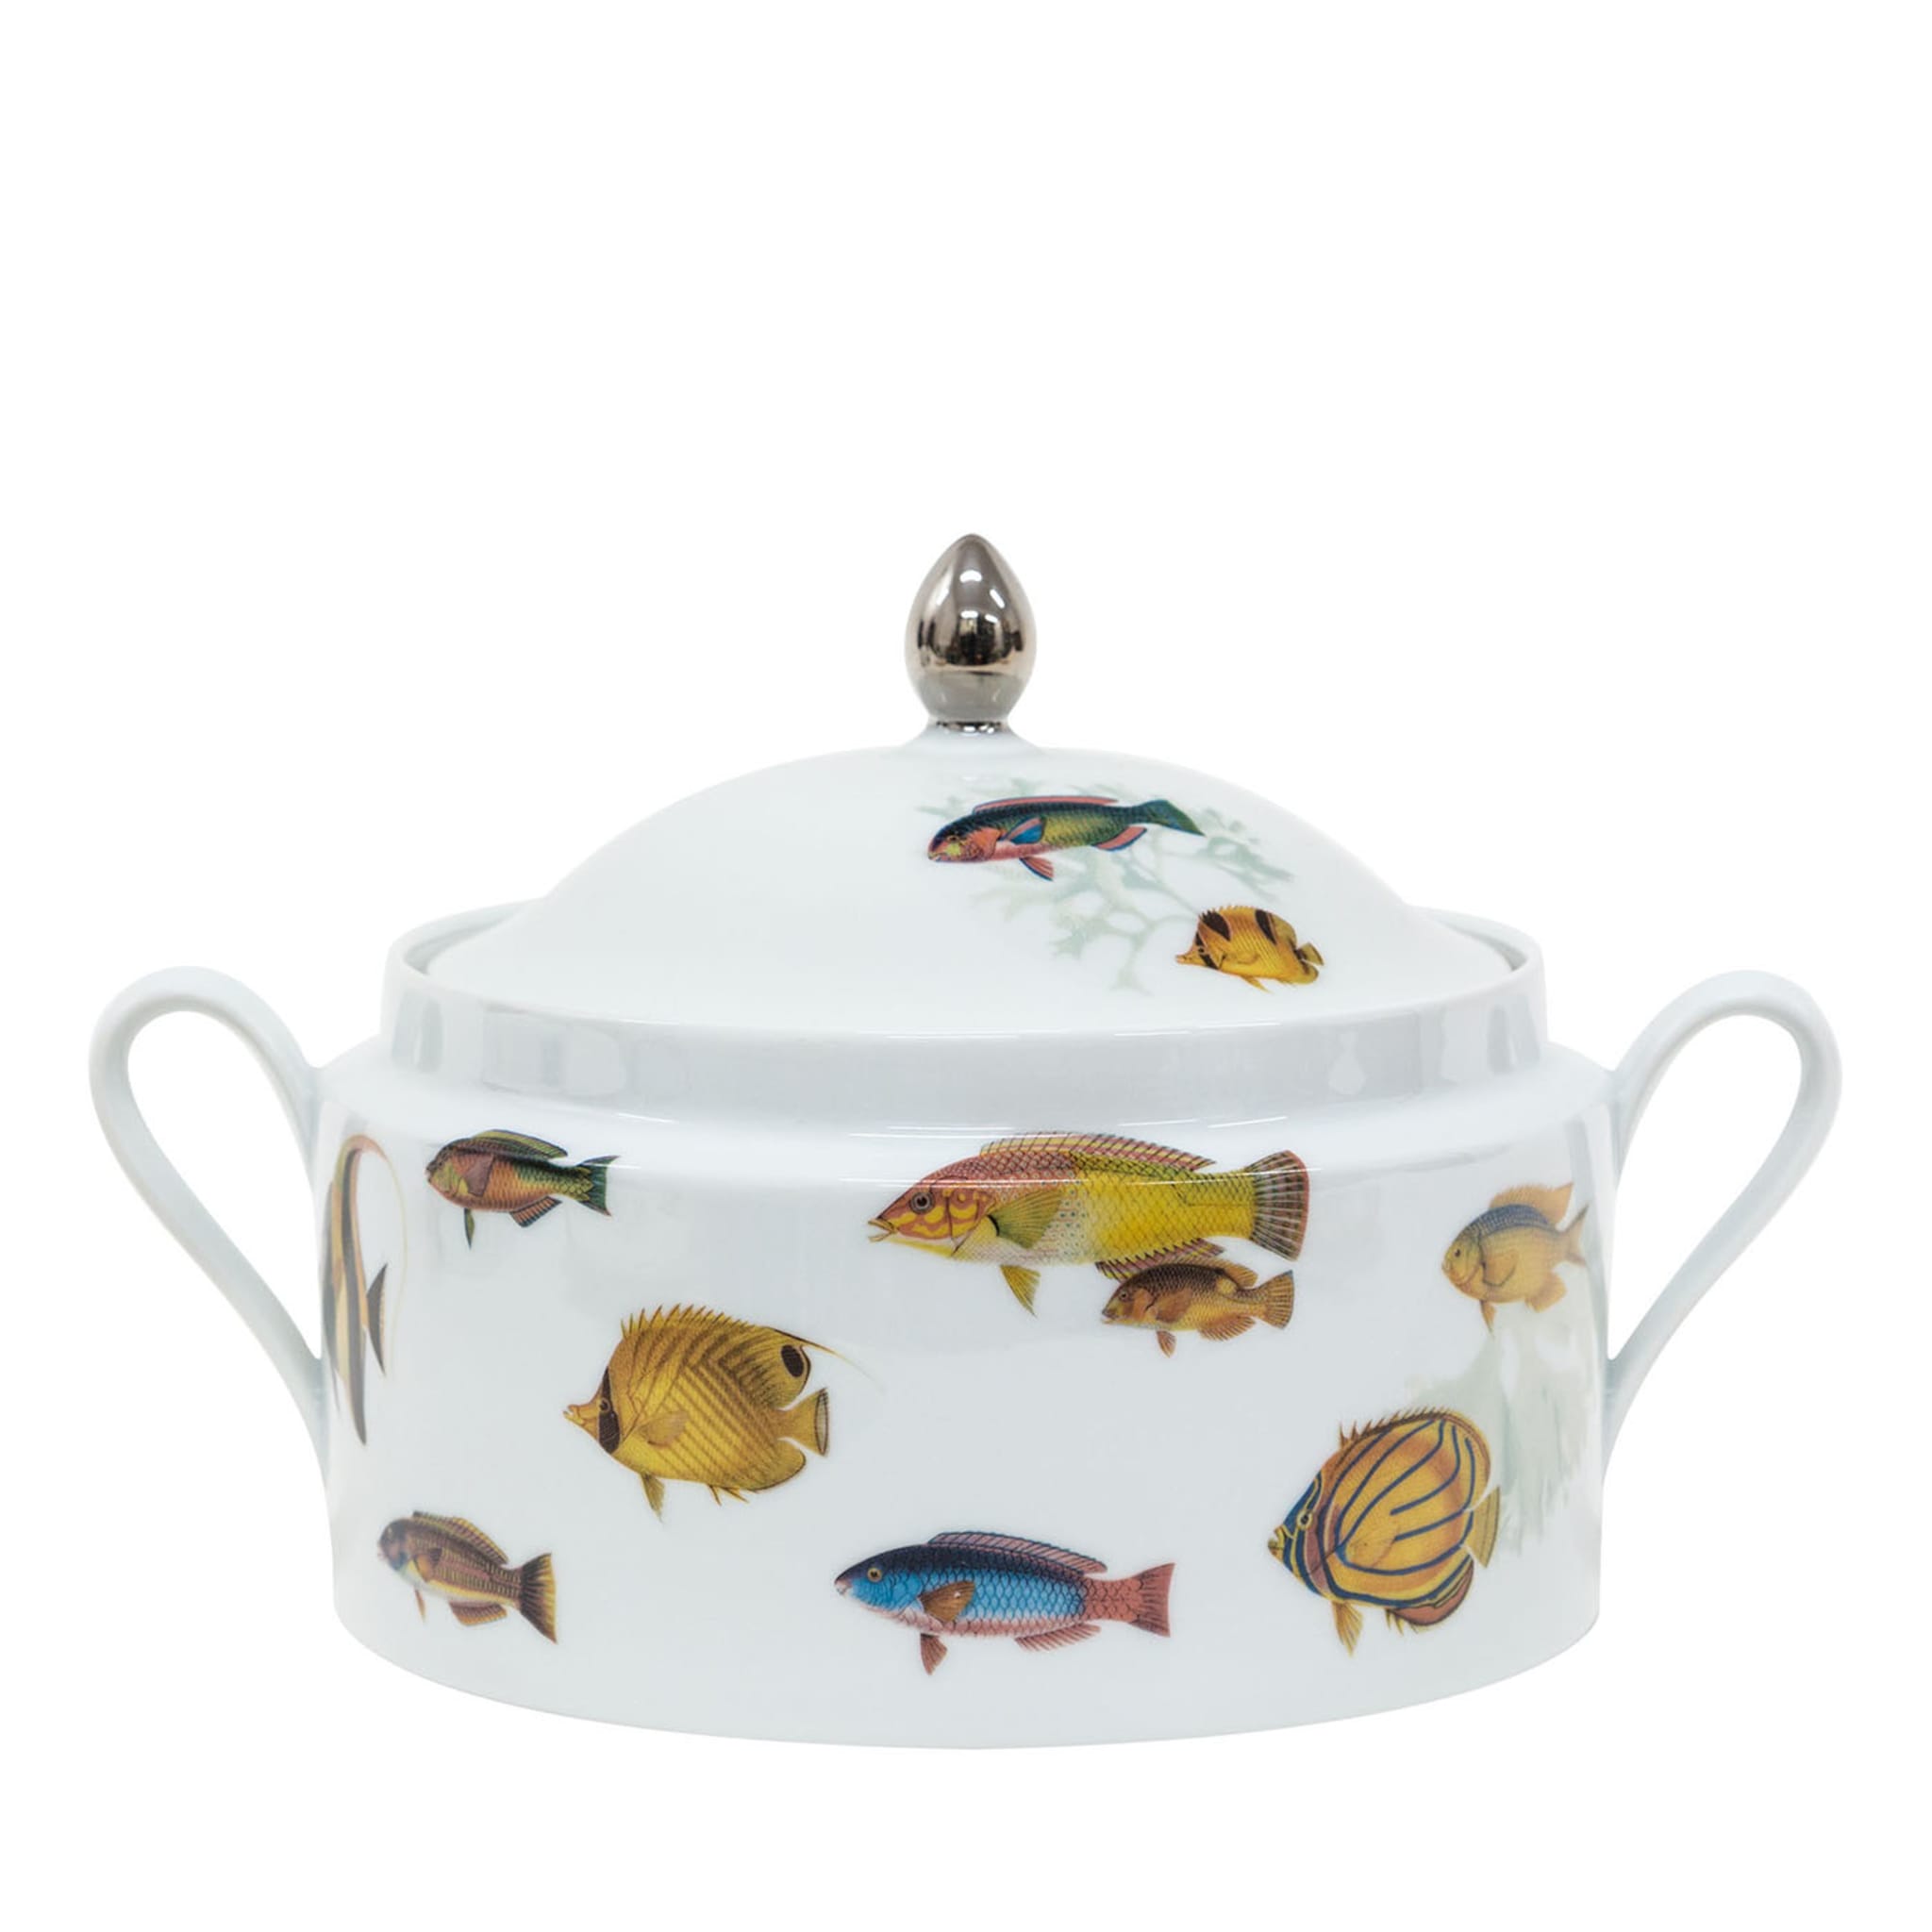 Amami Porcelain Tureen With Tropical Fish - Main view